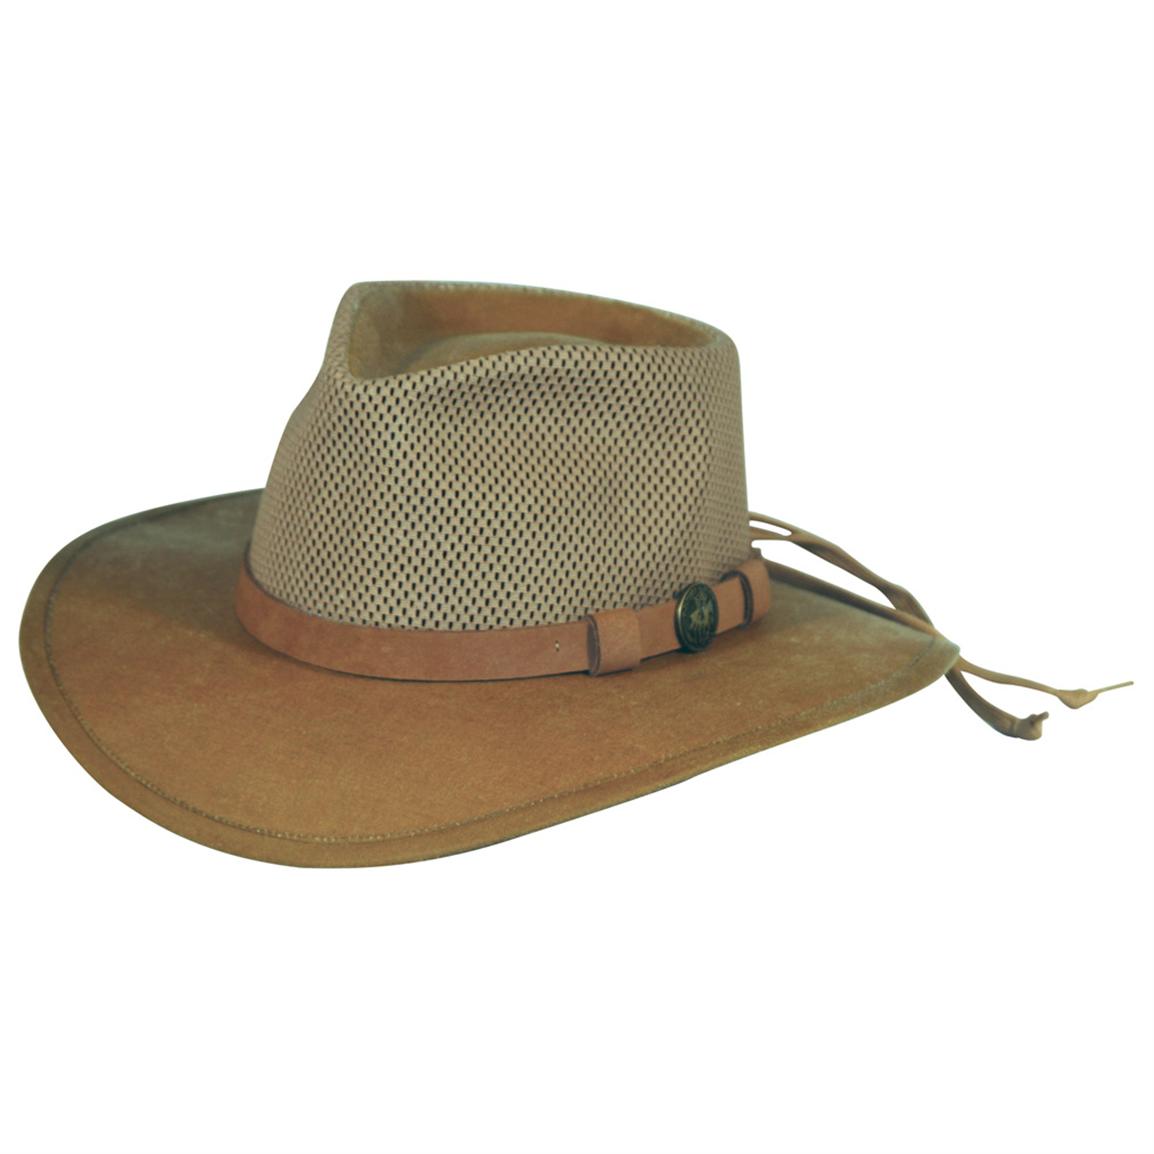 Outback Trading Kodiak Hat With Mesh 282411 Hats And Caps At Sportsman